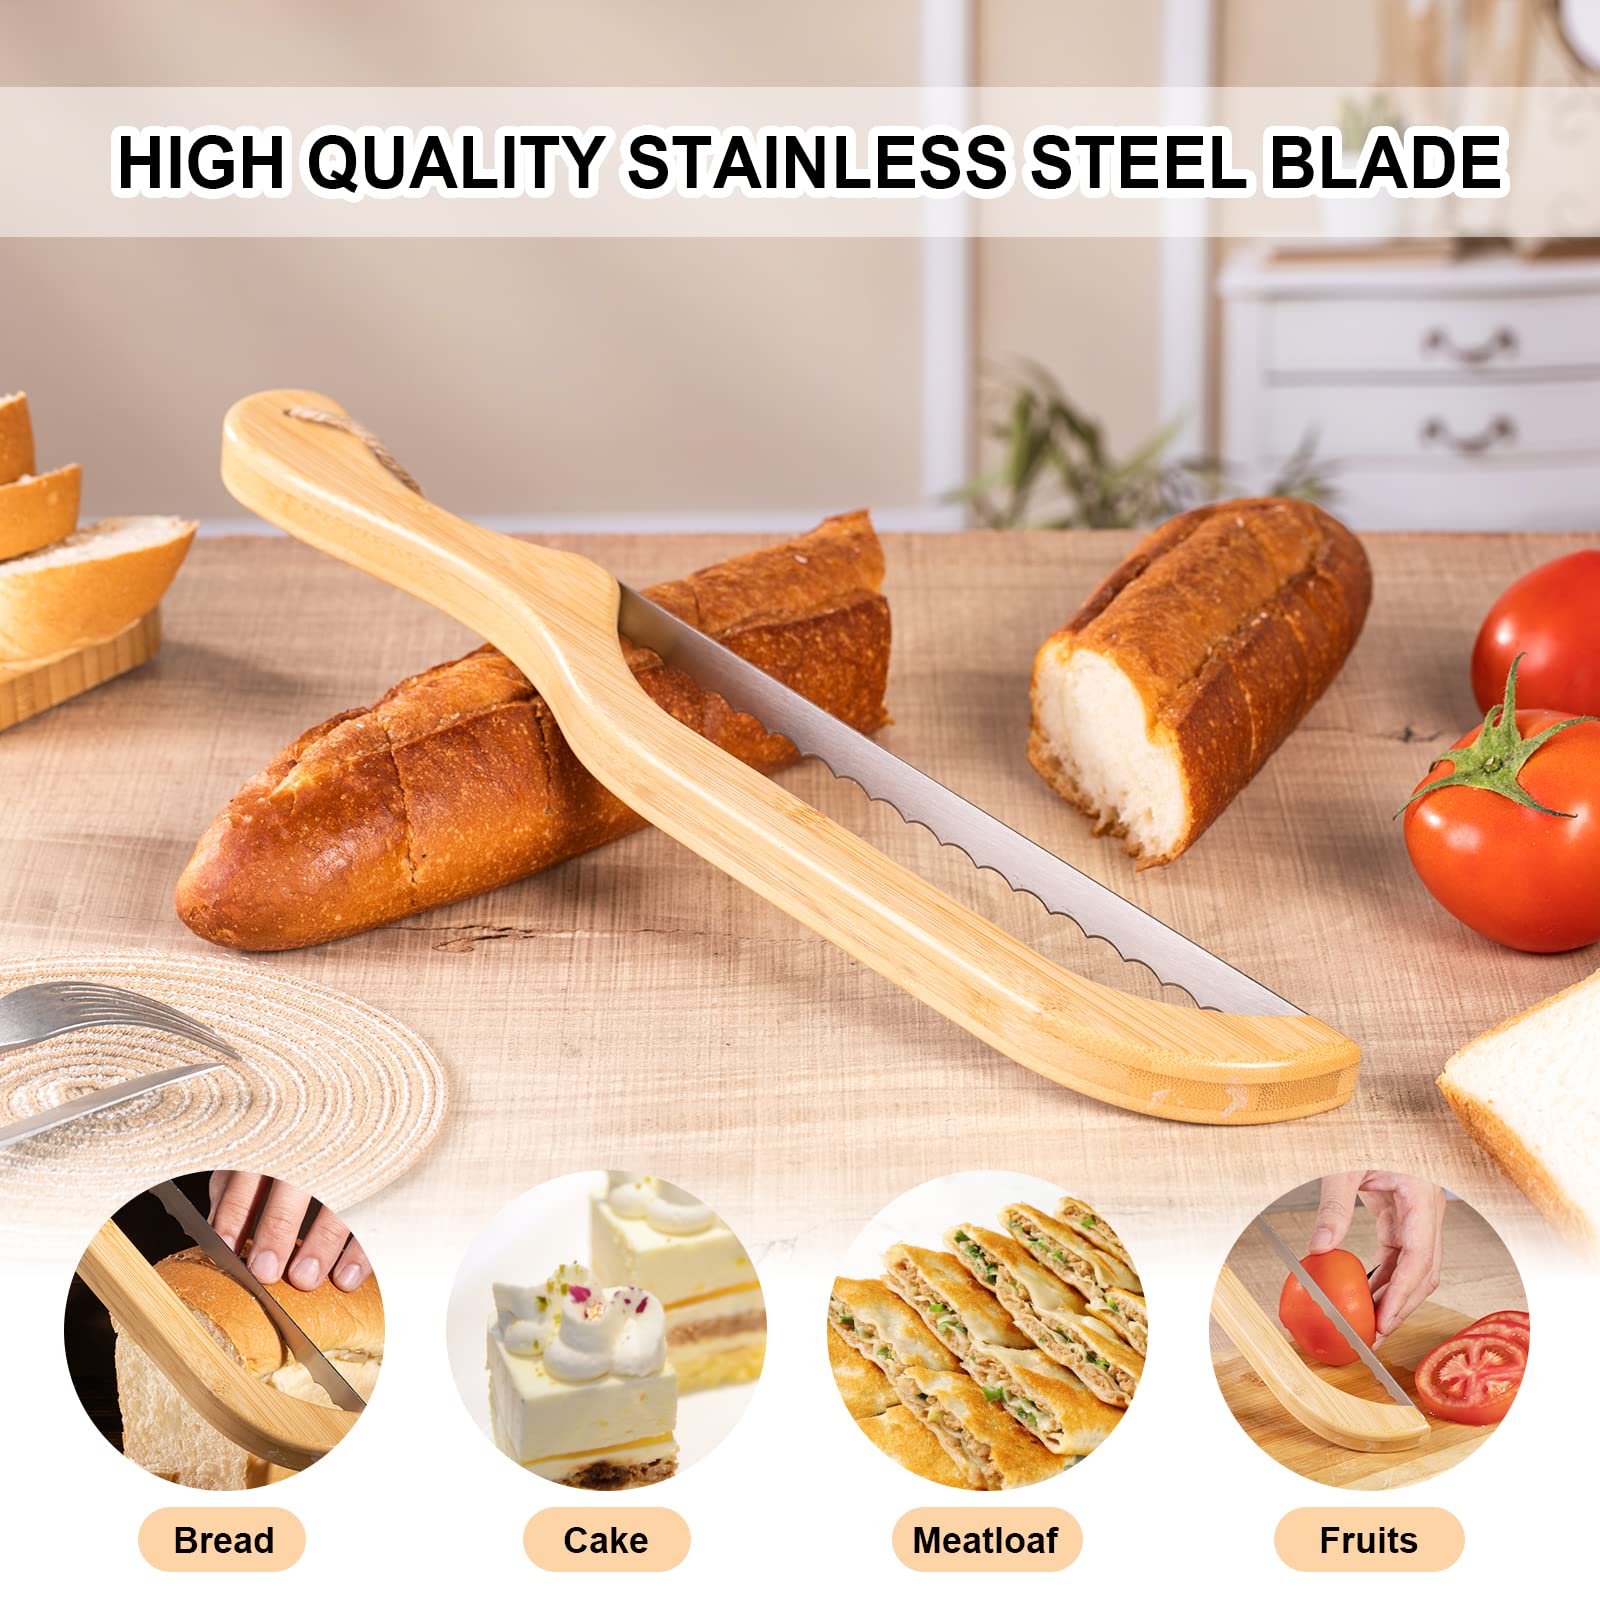 Recsrdce Bread Bow Knife， bread knife for homemade bread, sourdough bread knife，15.7" Serrated Bread Knife，Premium Stainless Steel,Used for slicing bread（Bamboo Handle - Right Handed）